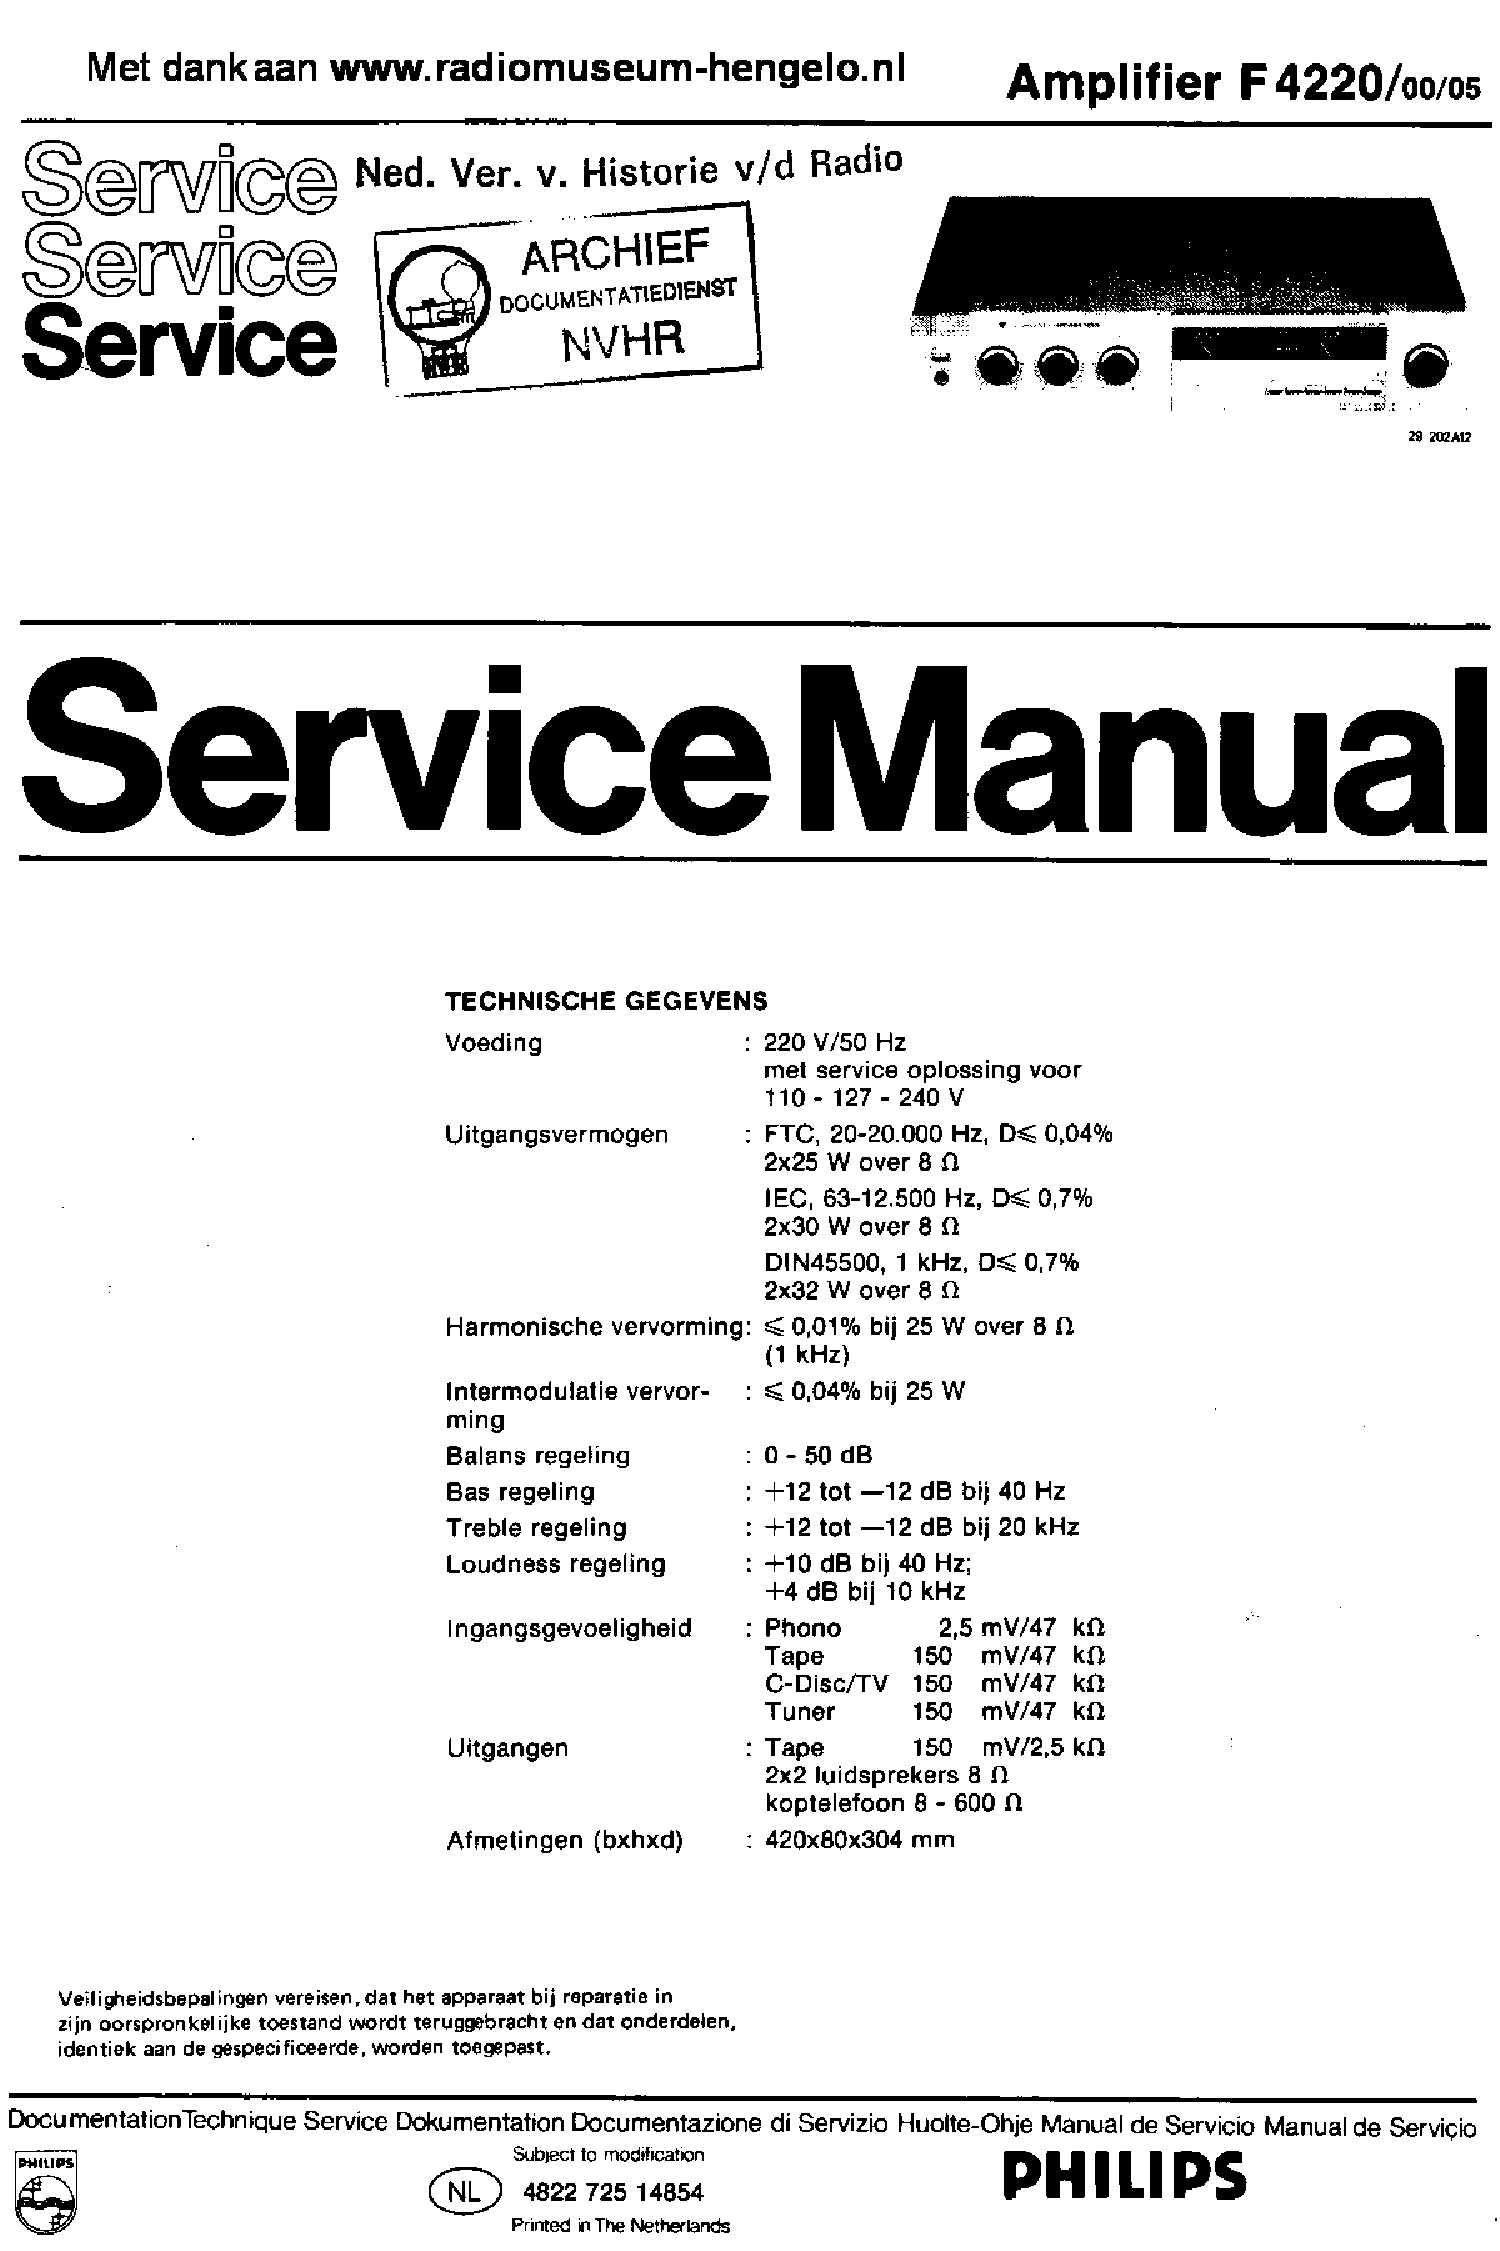 PHILIPS F4220-00-05 2X30W AMPLIFIER SM service manual (1st page)